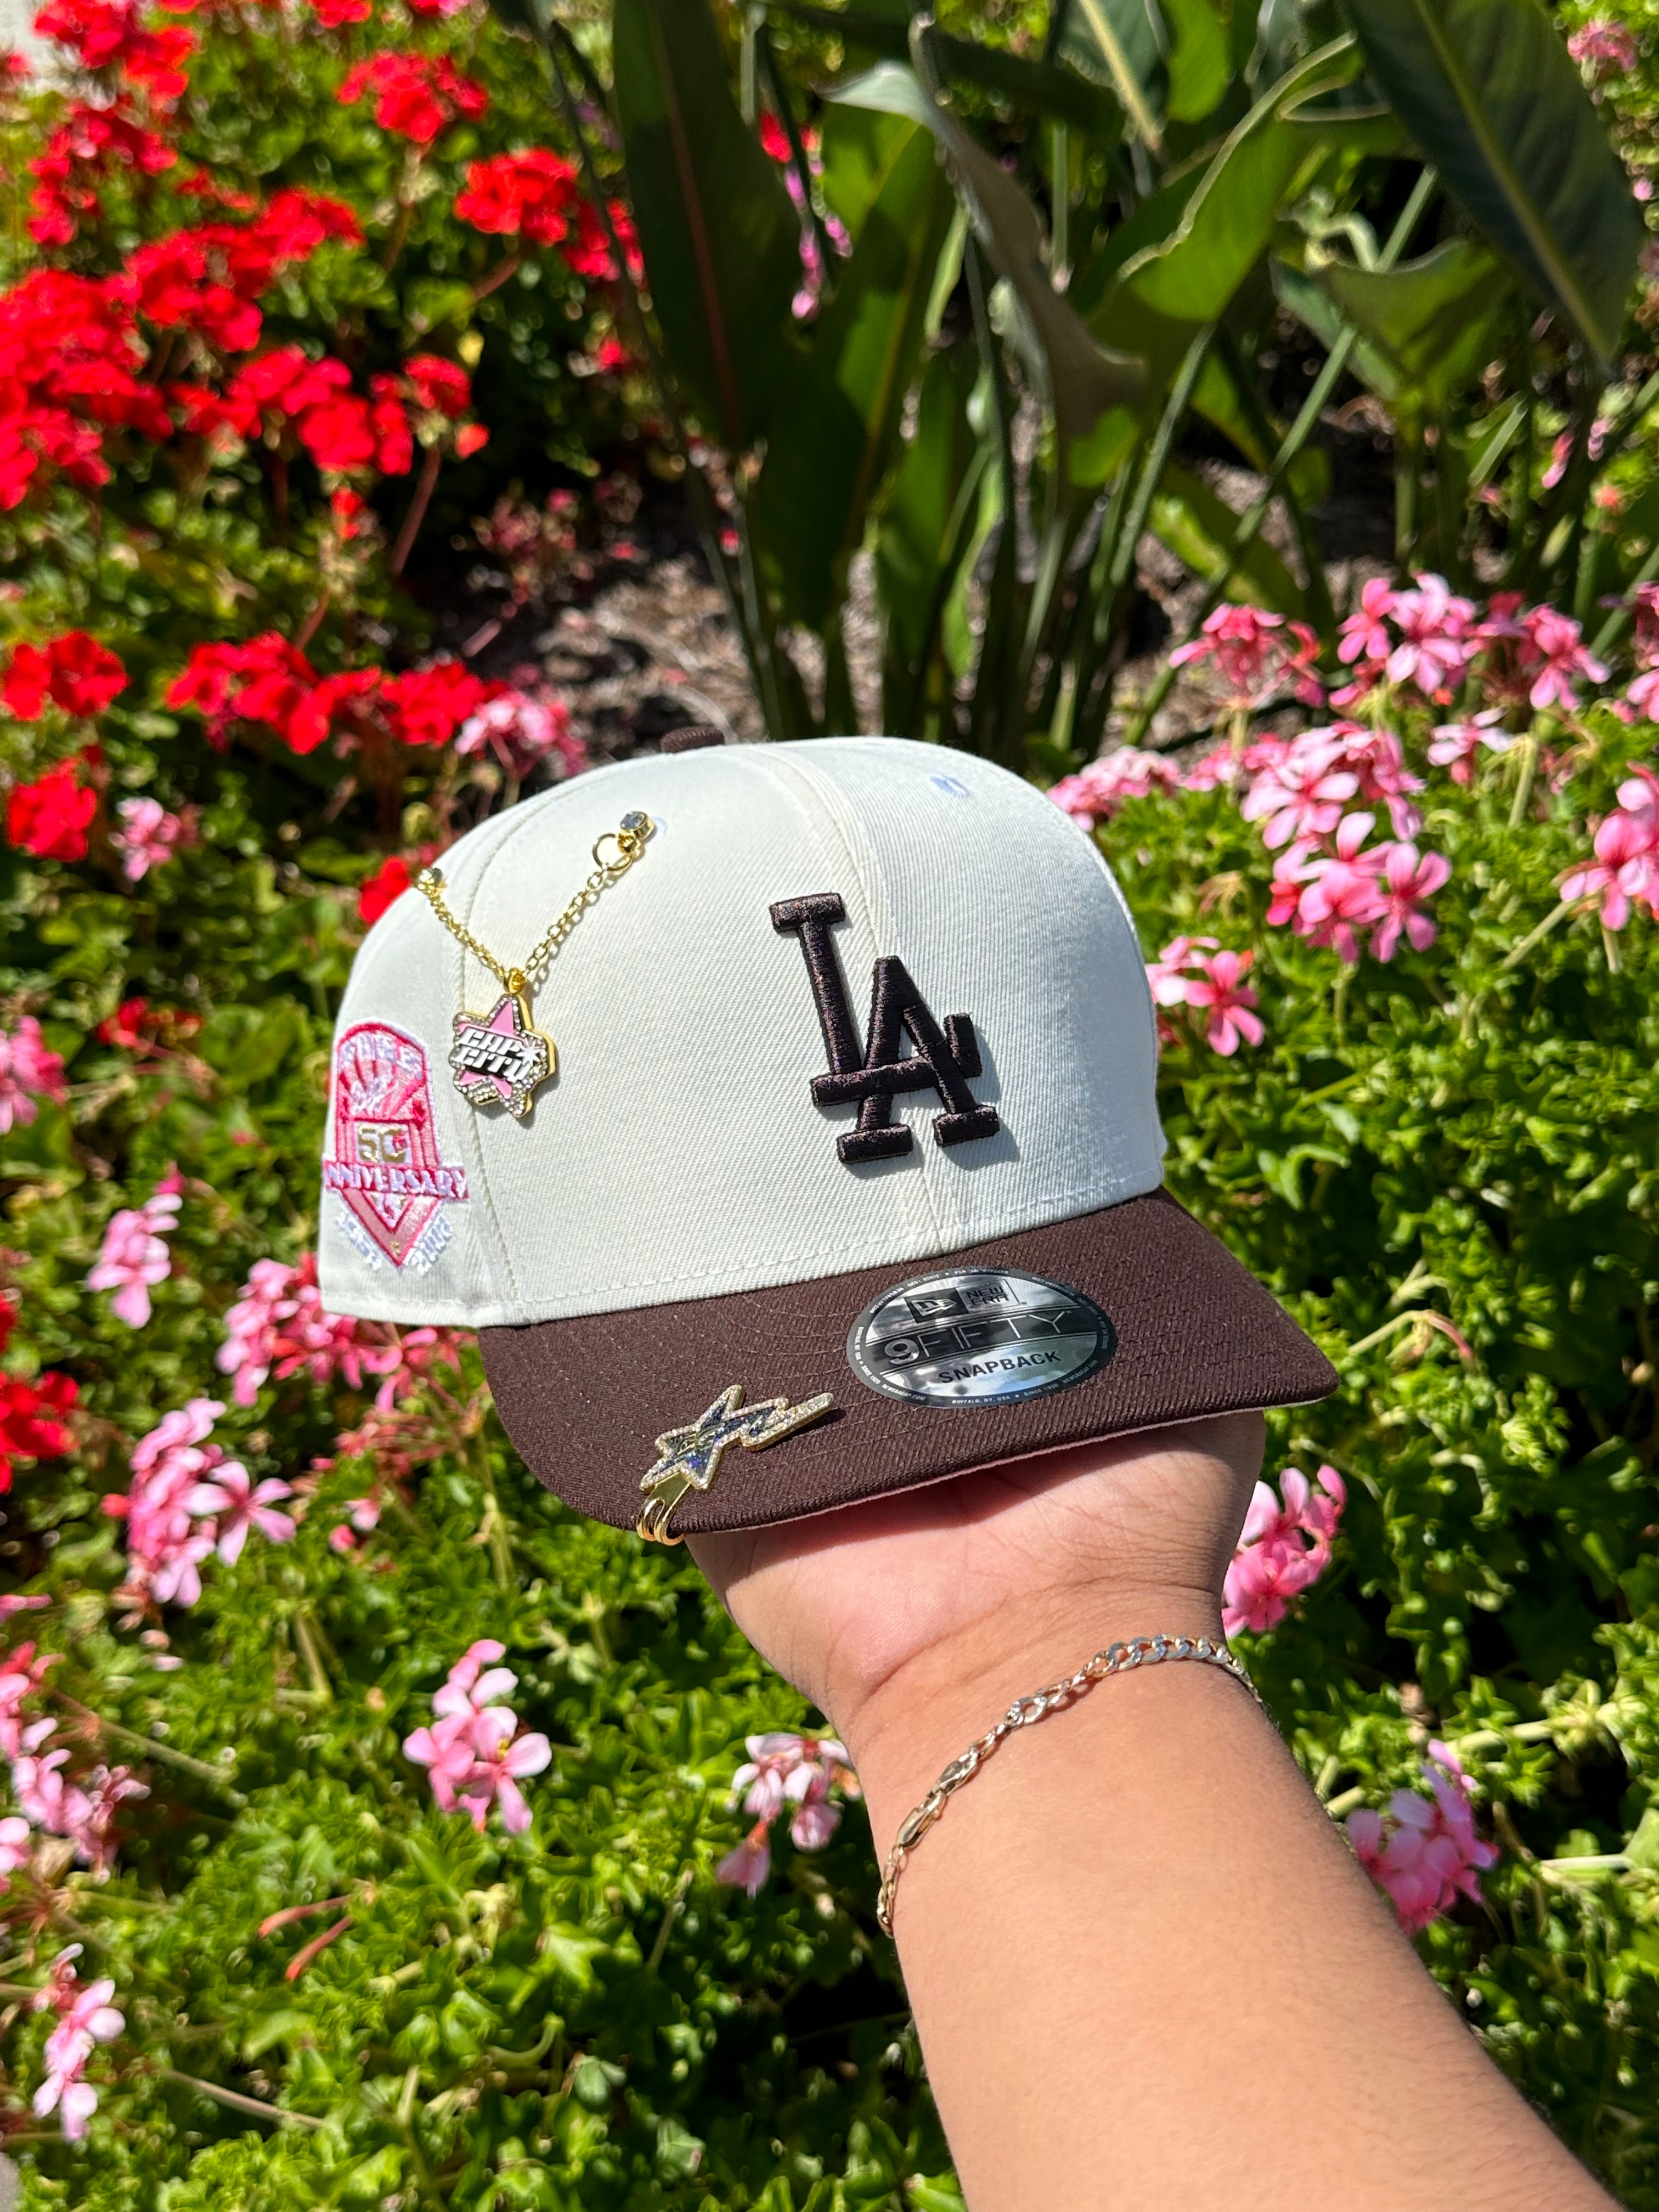 NEW ERA EXCLUSIVE 9FIFTY CHROME WHITE/MOCHA LOS ANGELES DODGERS SNAPBACK W/ 50TH ANNIVERSARY PATCH